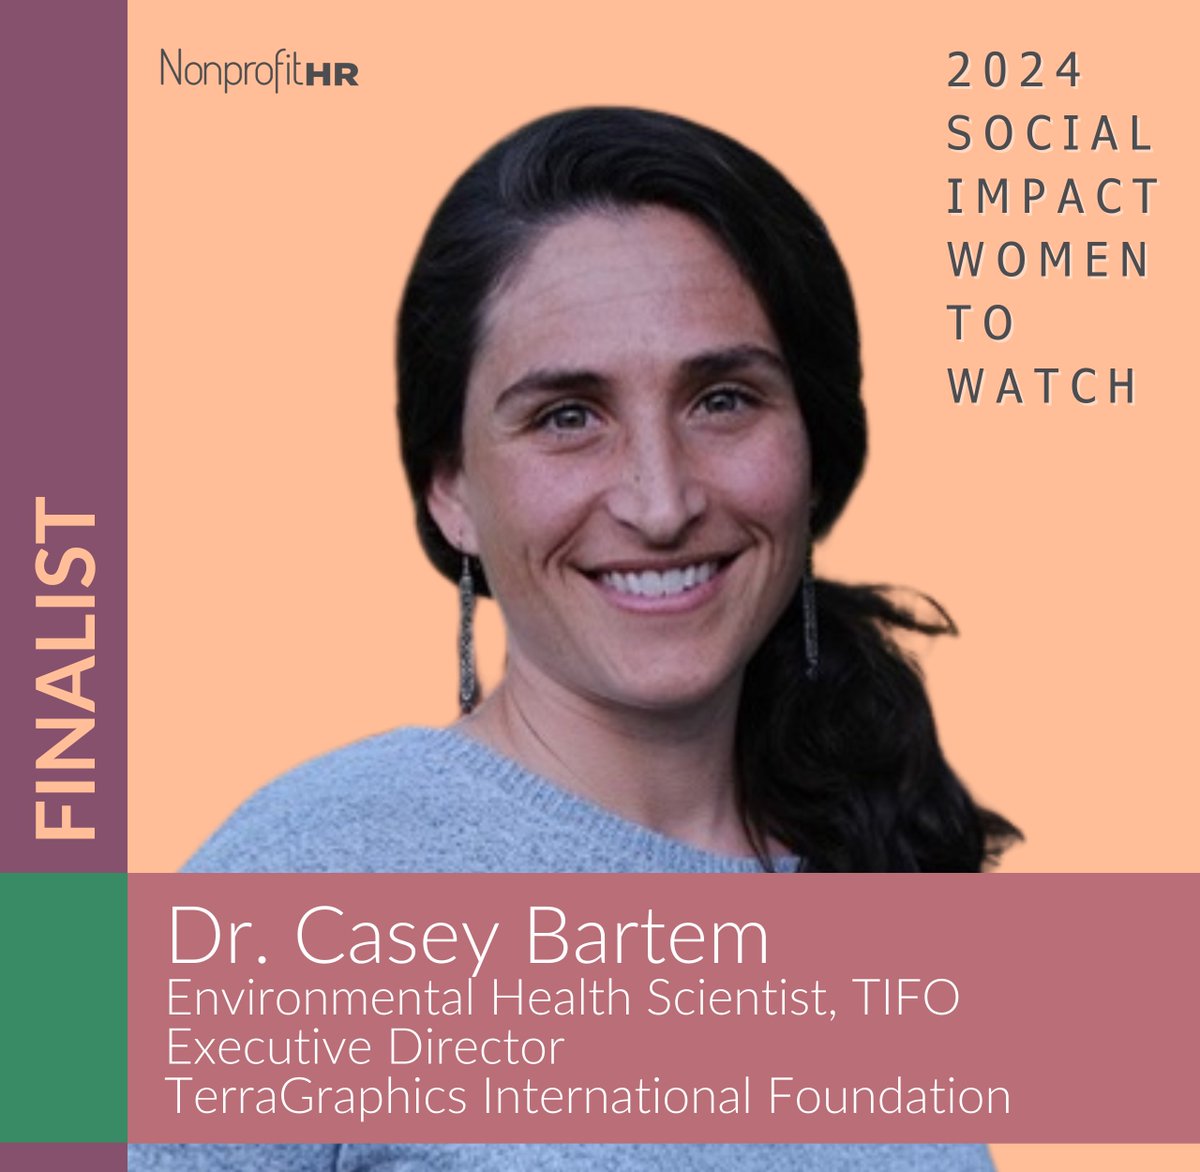 Finalist Spotlight Series: Dr. Casey Bartrem is an Environmental Scientist and TIFO’s Executive Director. Learn more about Dr. Bartrem and all the exceptional finalists named to this year's Social Impact Women to Watch List: nonprofithr.com/2024-social-im… 
#NonprofitHR #2024W2W